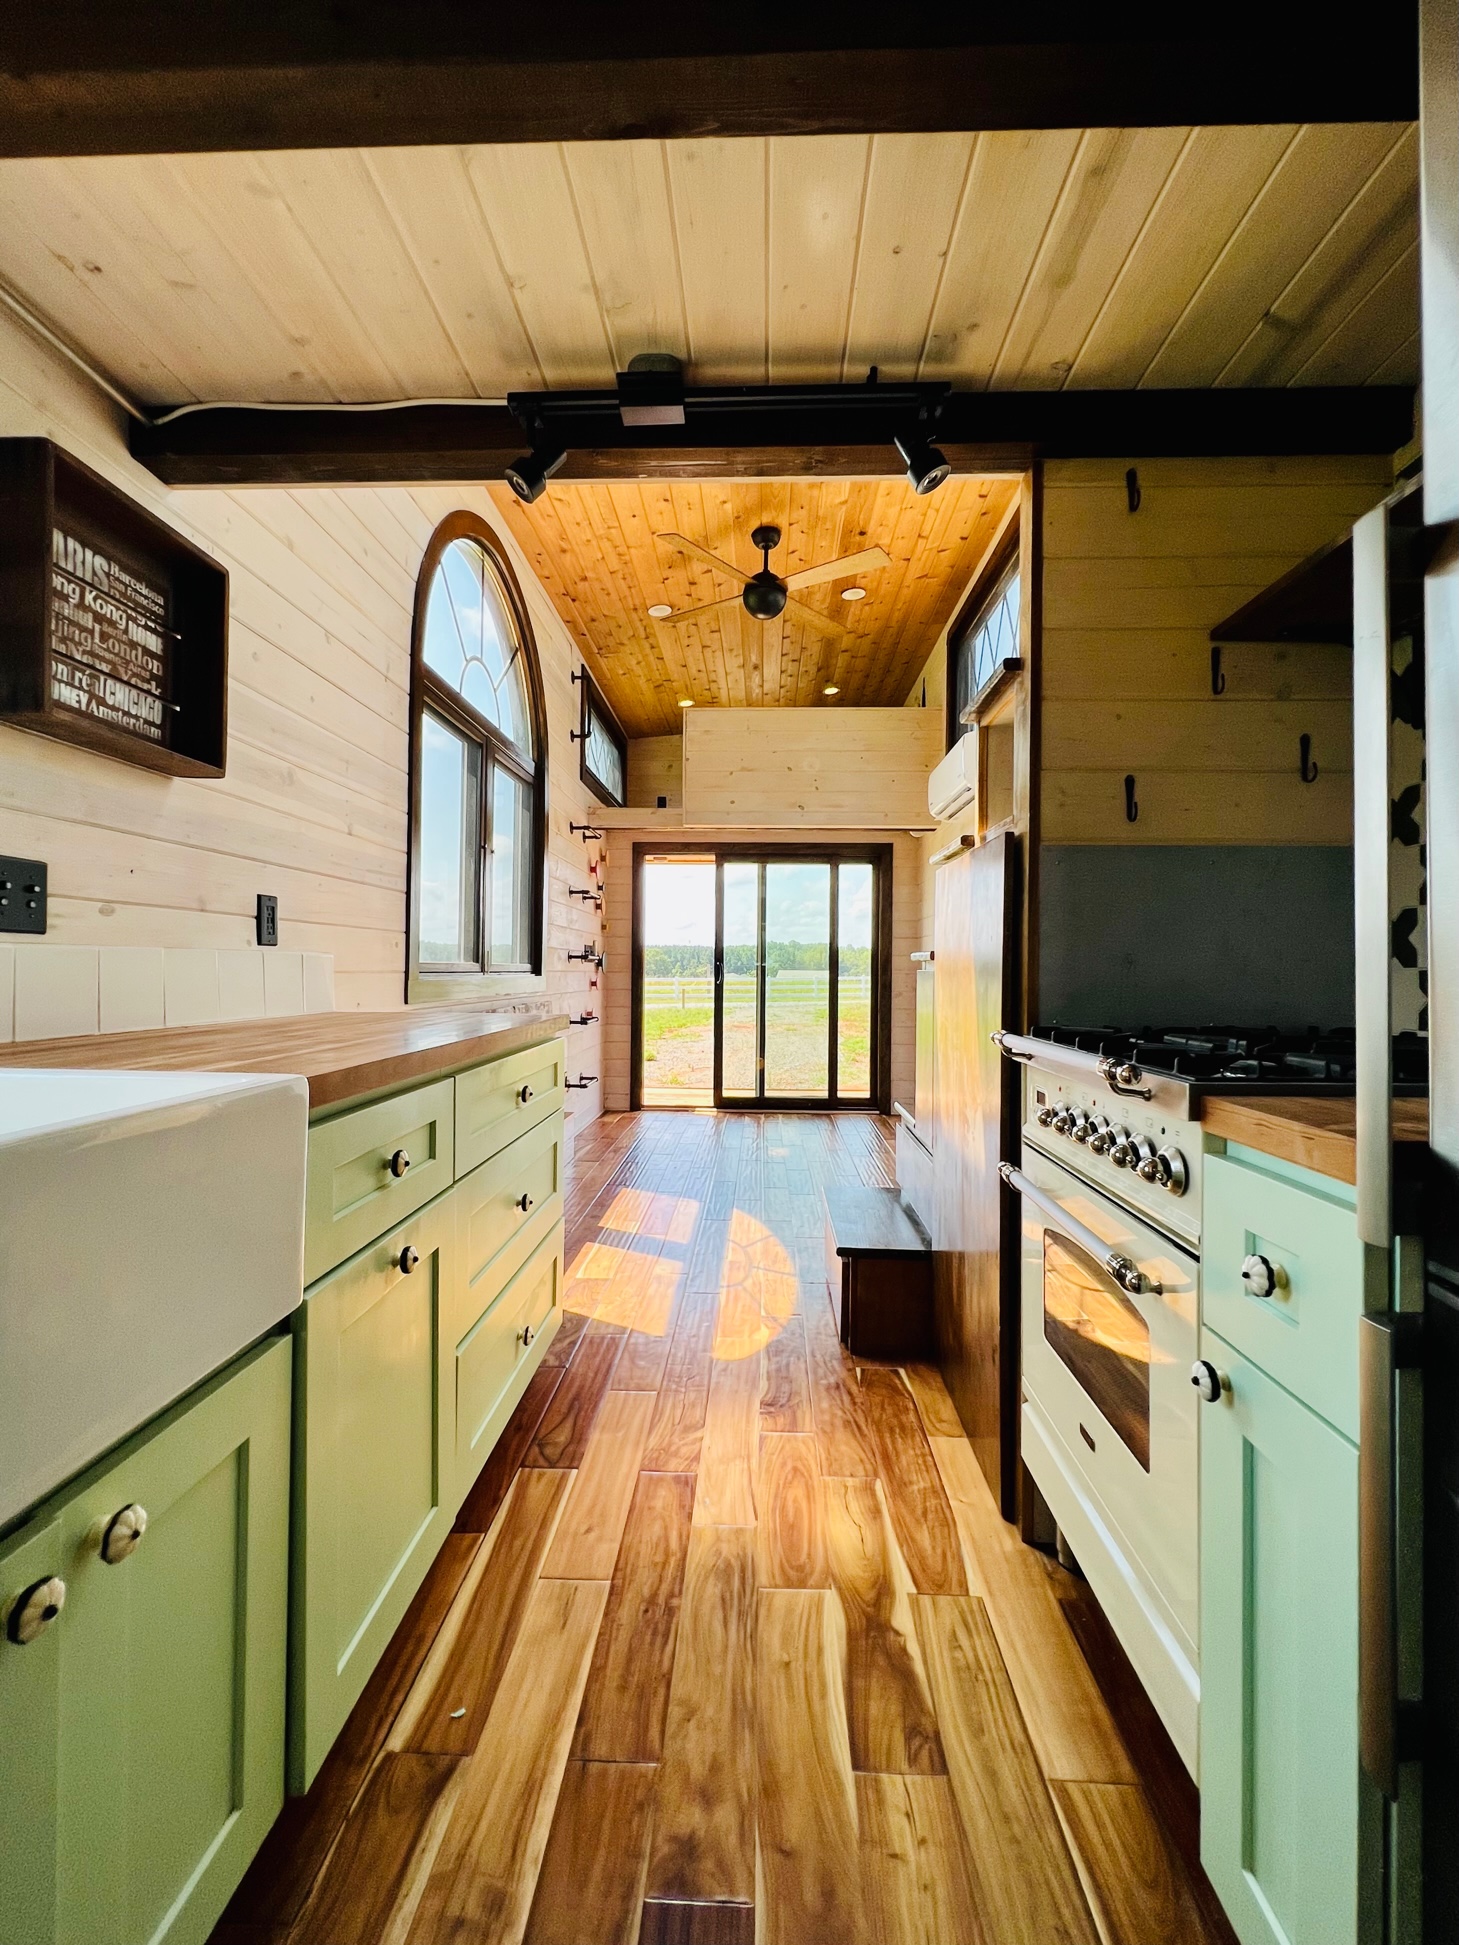 Tiny House for Sale - 32ft Perch & Nest Unique Tiny Home on